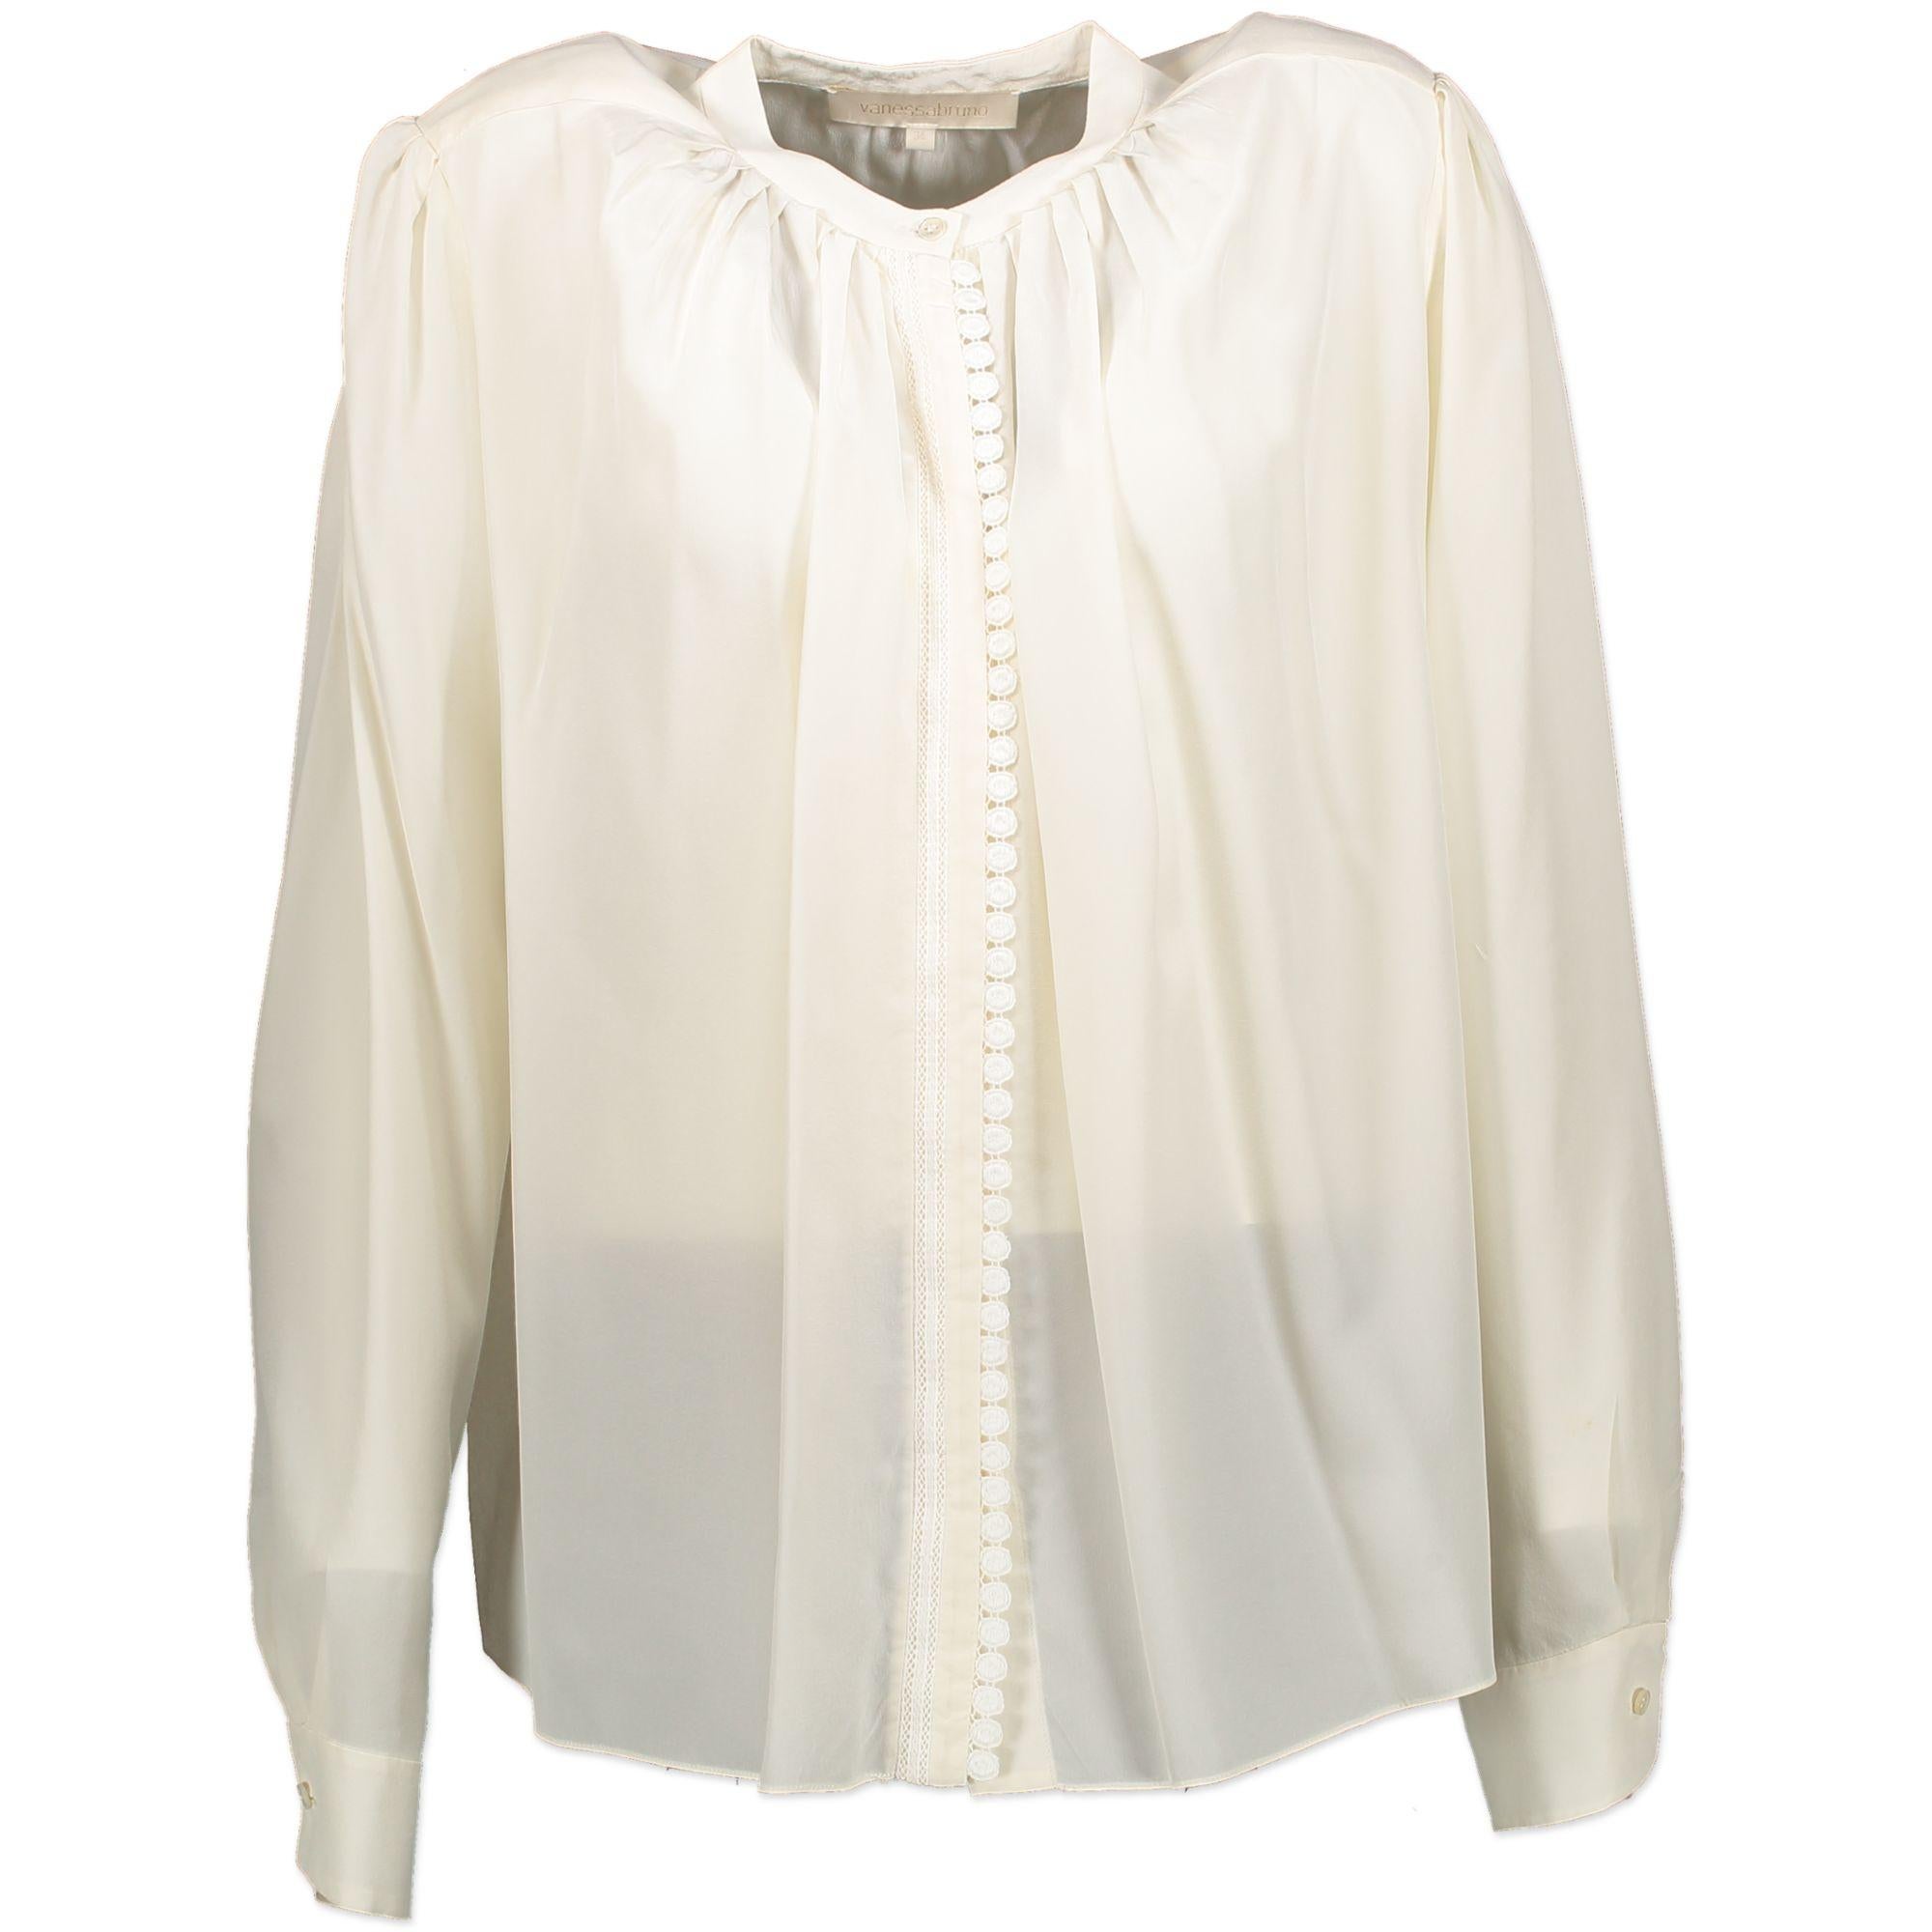 In good condition.

Vanessa Bruno white blouse - Size 34

Style this blouse with a pencil skirt or some trouses and court heels, we bet that you will look very stylish on your work day. This blouse is long sleeved and has some embroideries all along